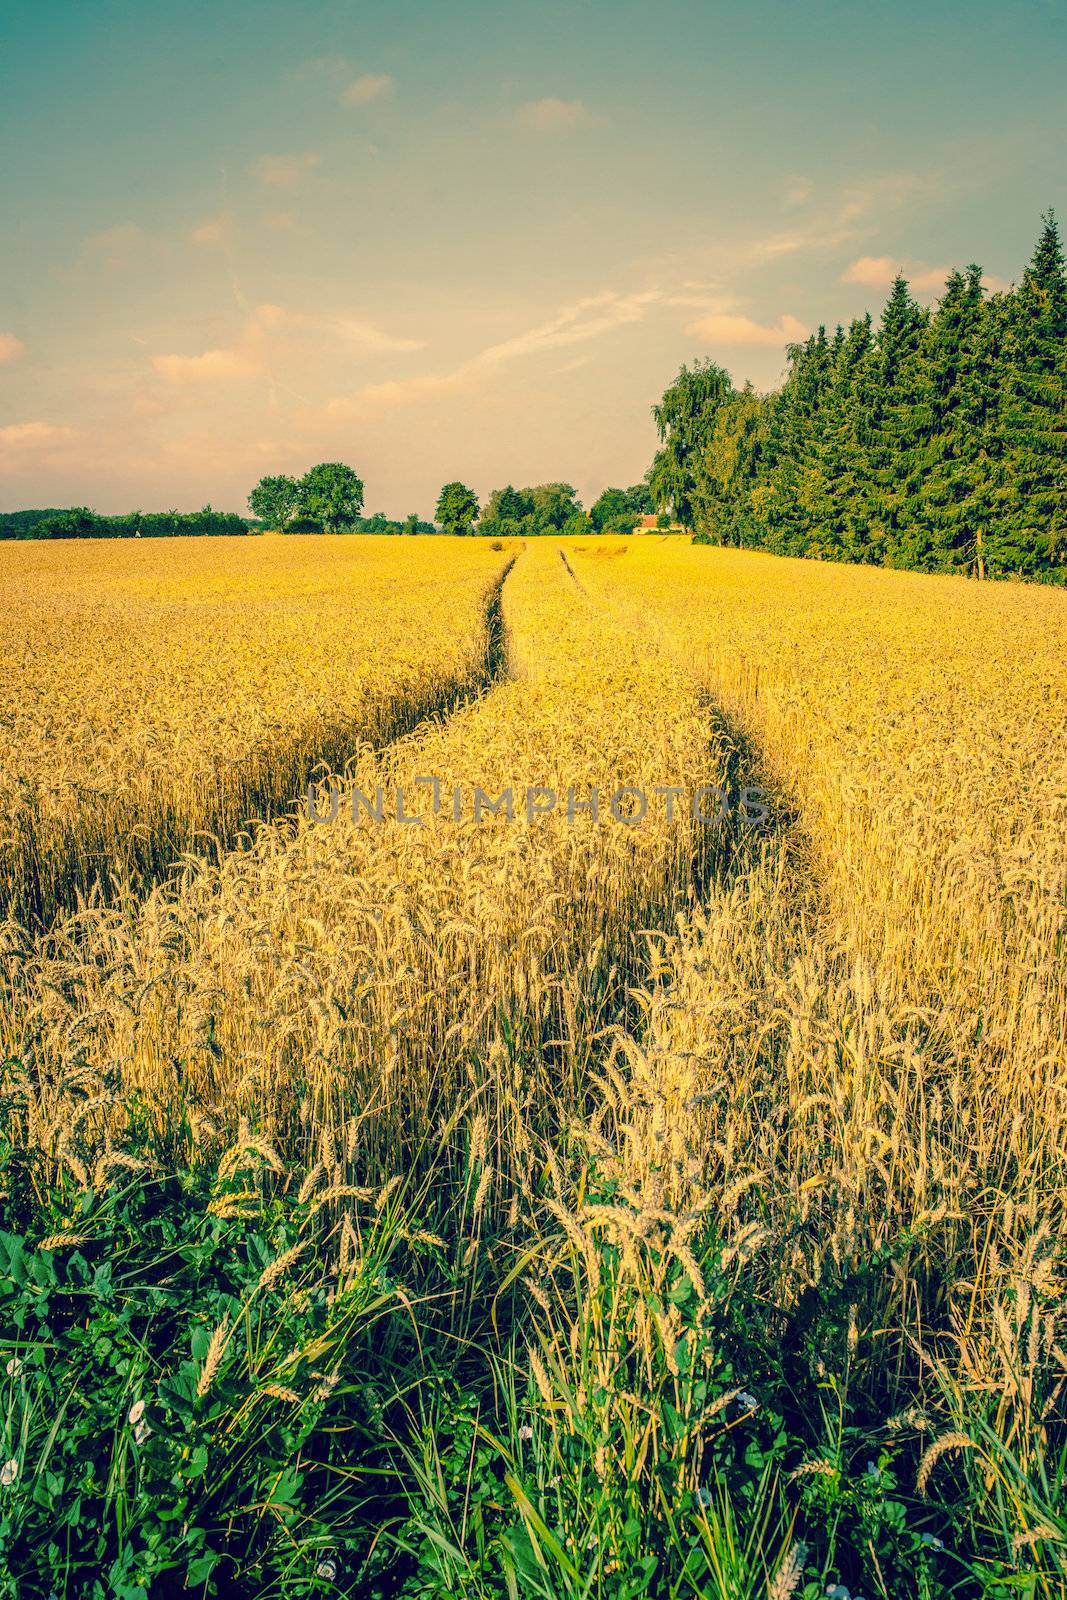 Countryside landscape with tracks in the crops